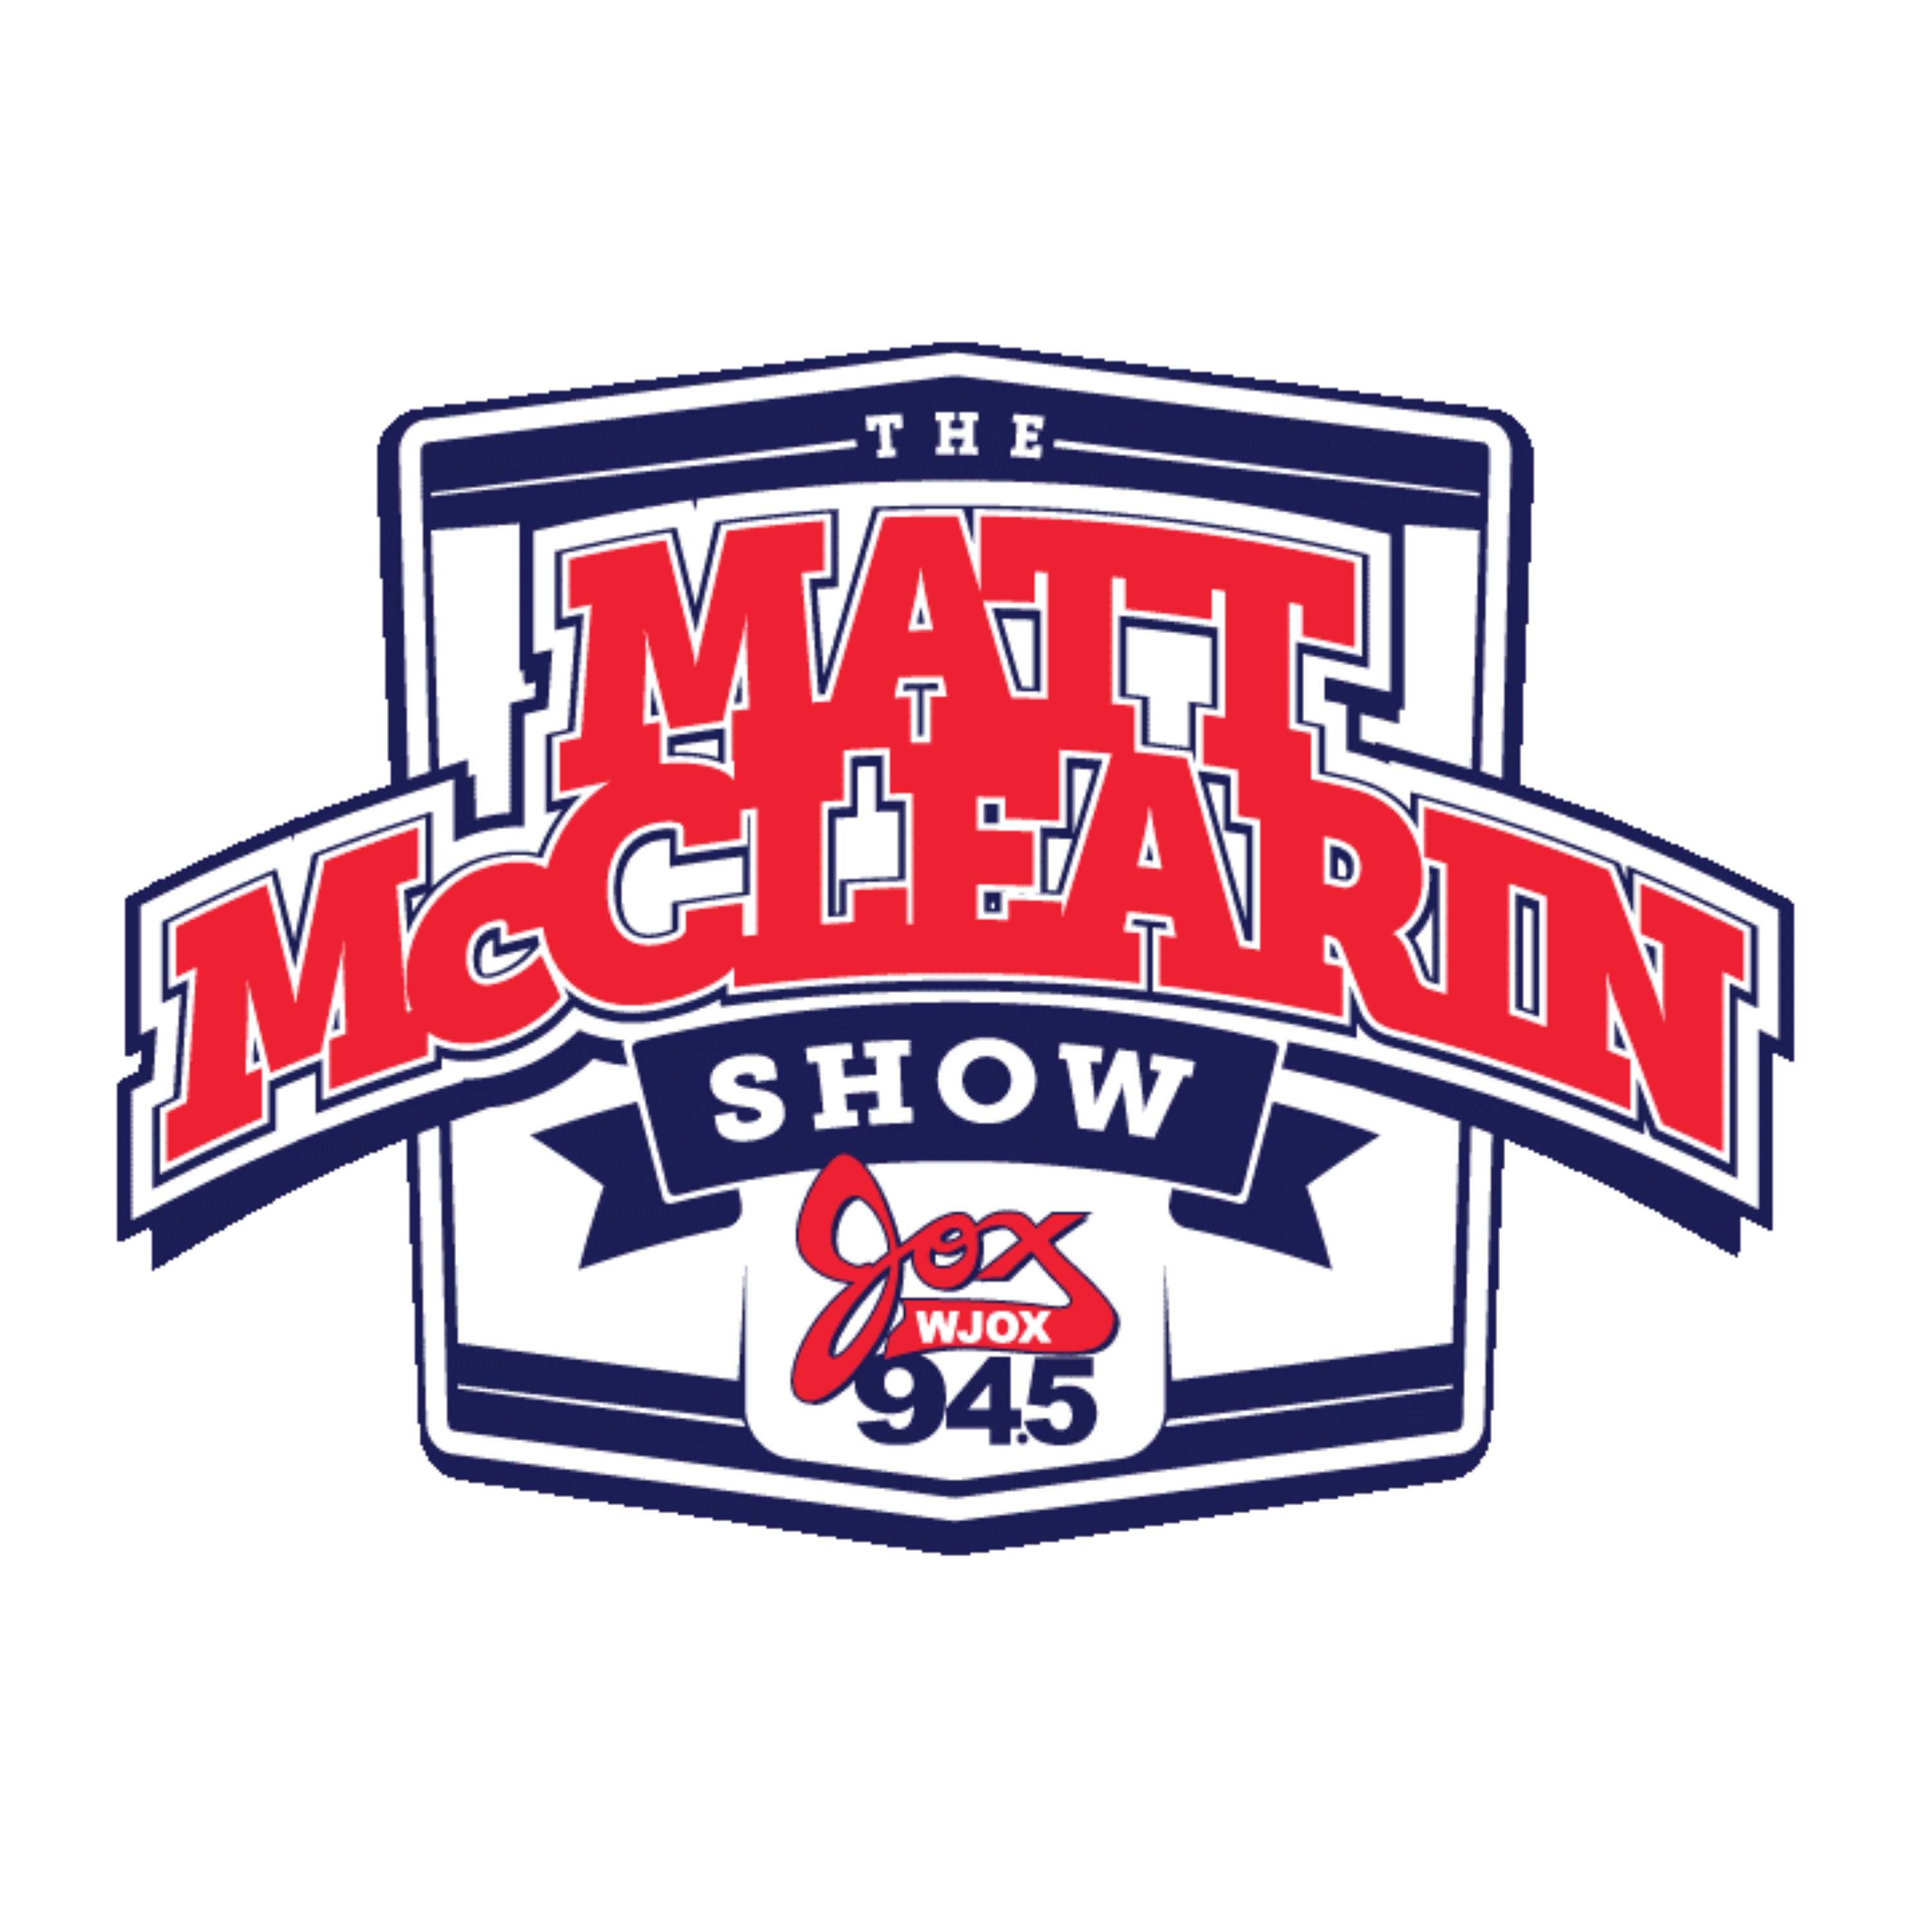 5-16-22 The Matt McClearin Show: Nick Vogel Discusses His USFL Journey